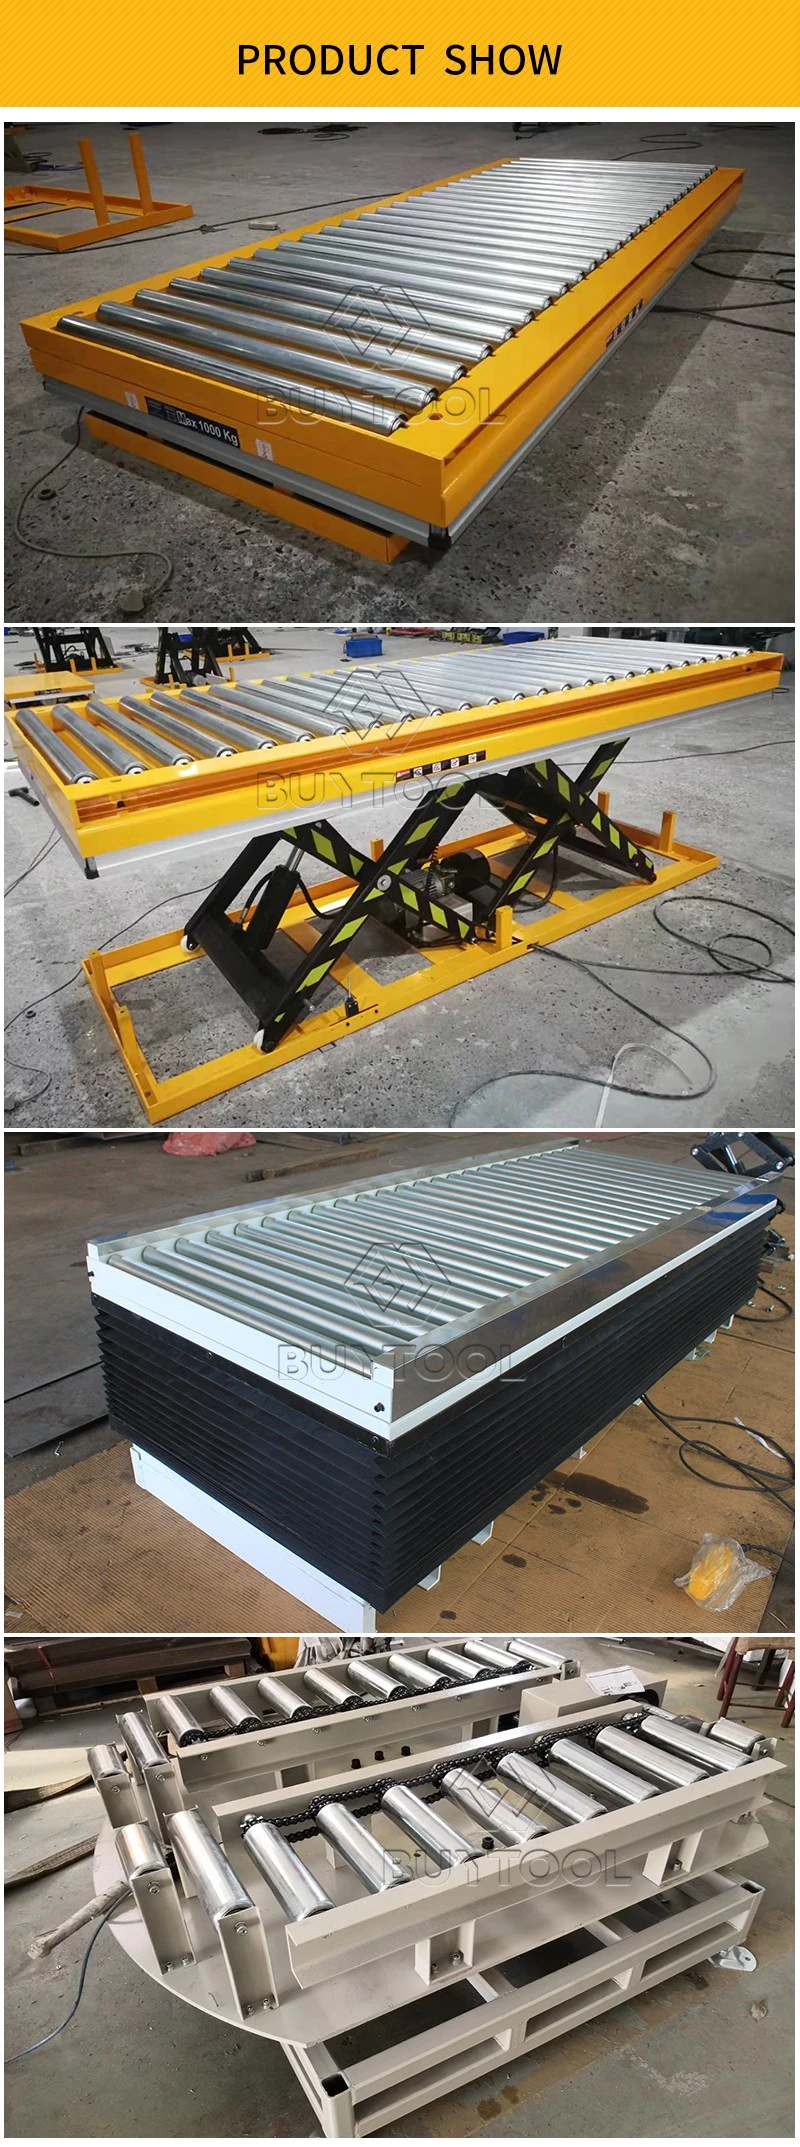 3000kgs Electric Hydraulic Stationary Lifter Table with Conveyor Roller or Transfer Ball